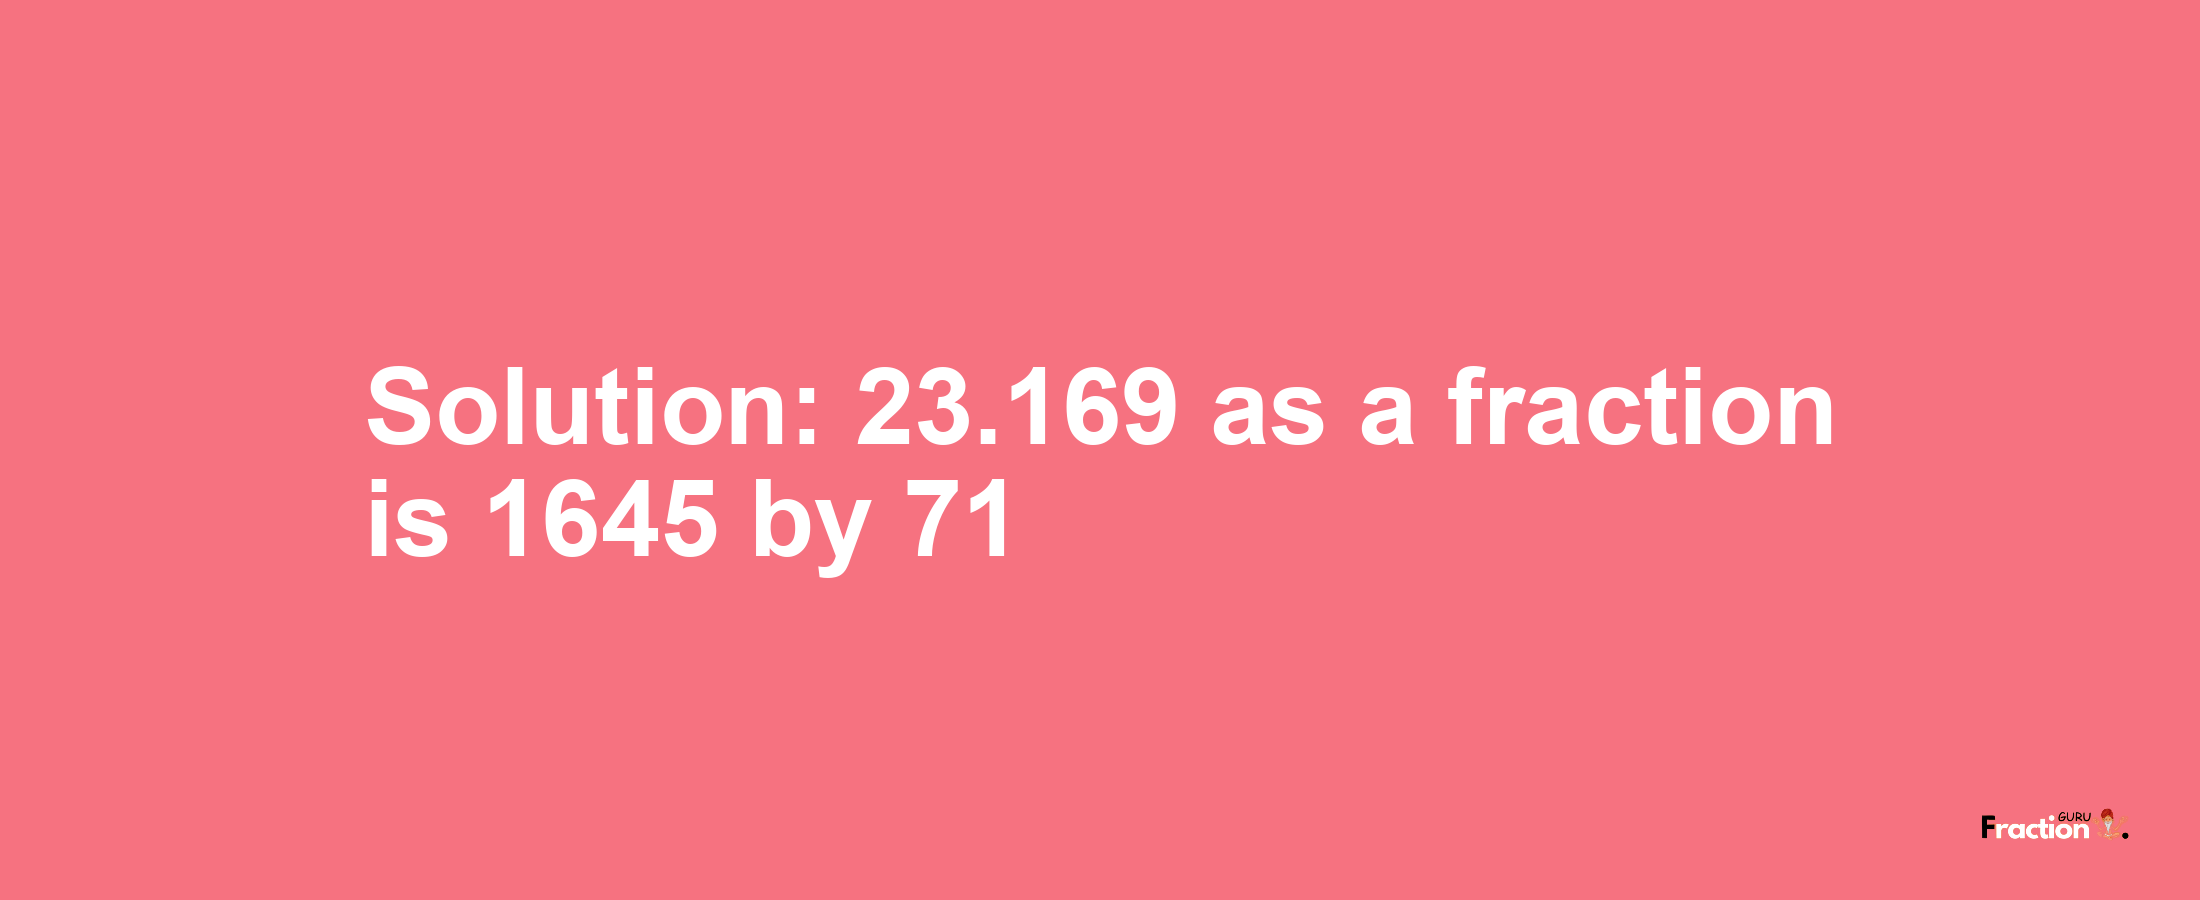 Solution:23.169 as a fraction is 1645/71